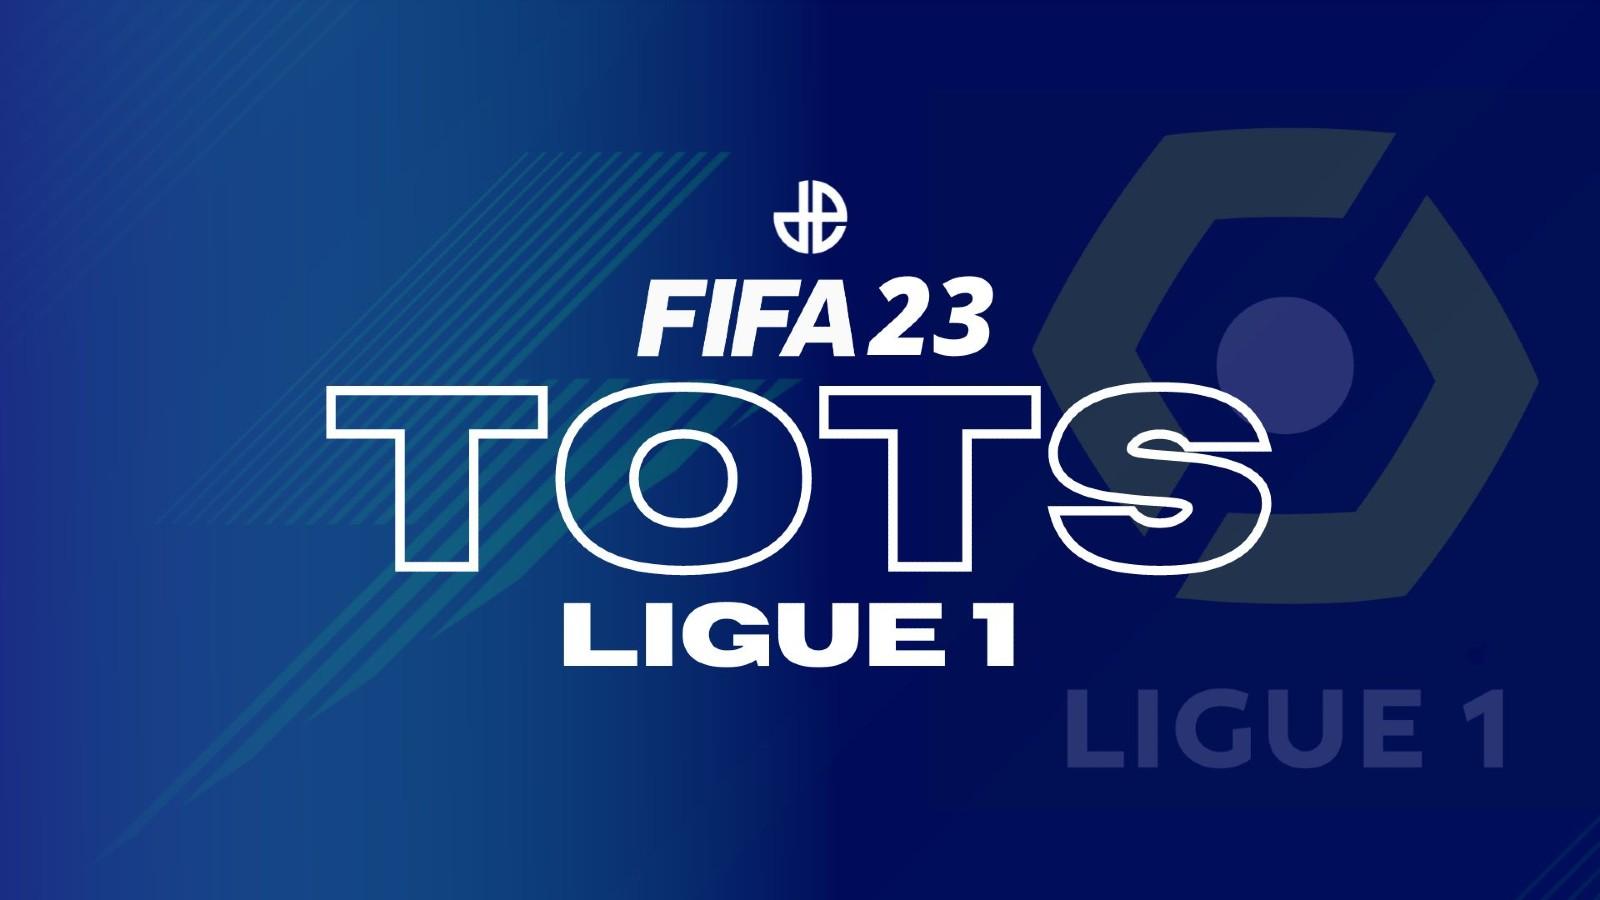 Graphic for FIFA 23 Ligue 1 TOTS